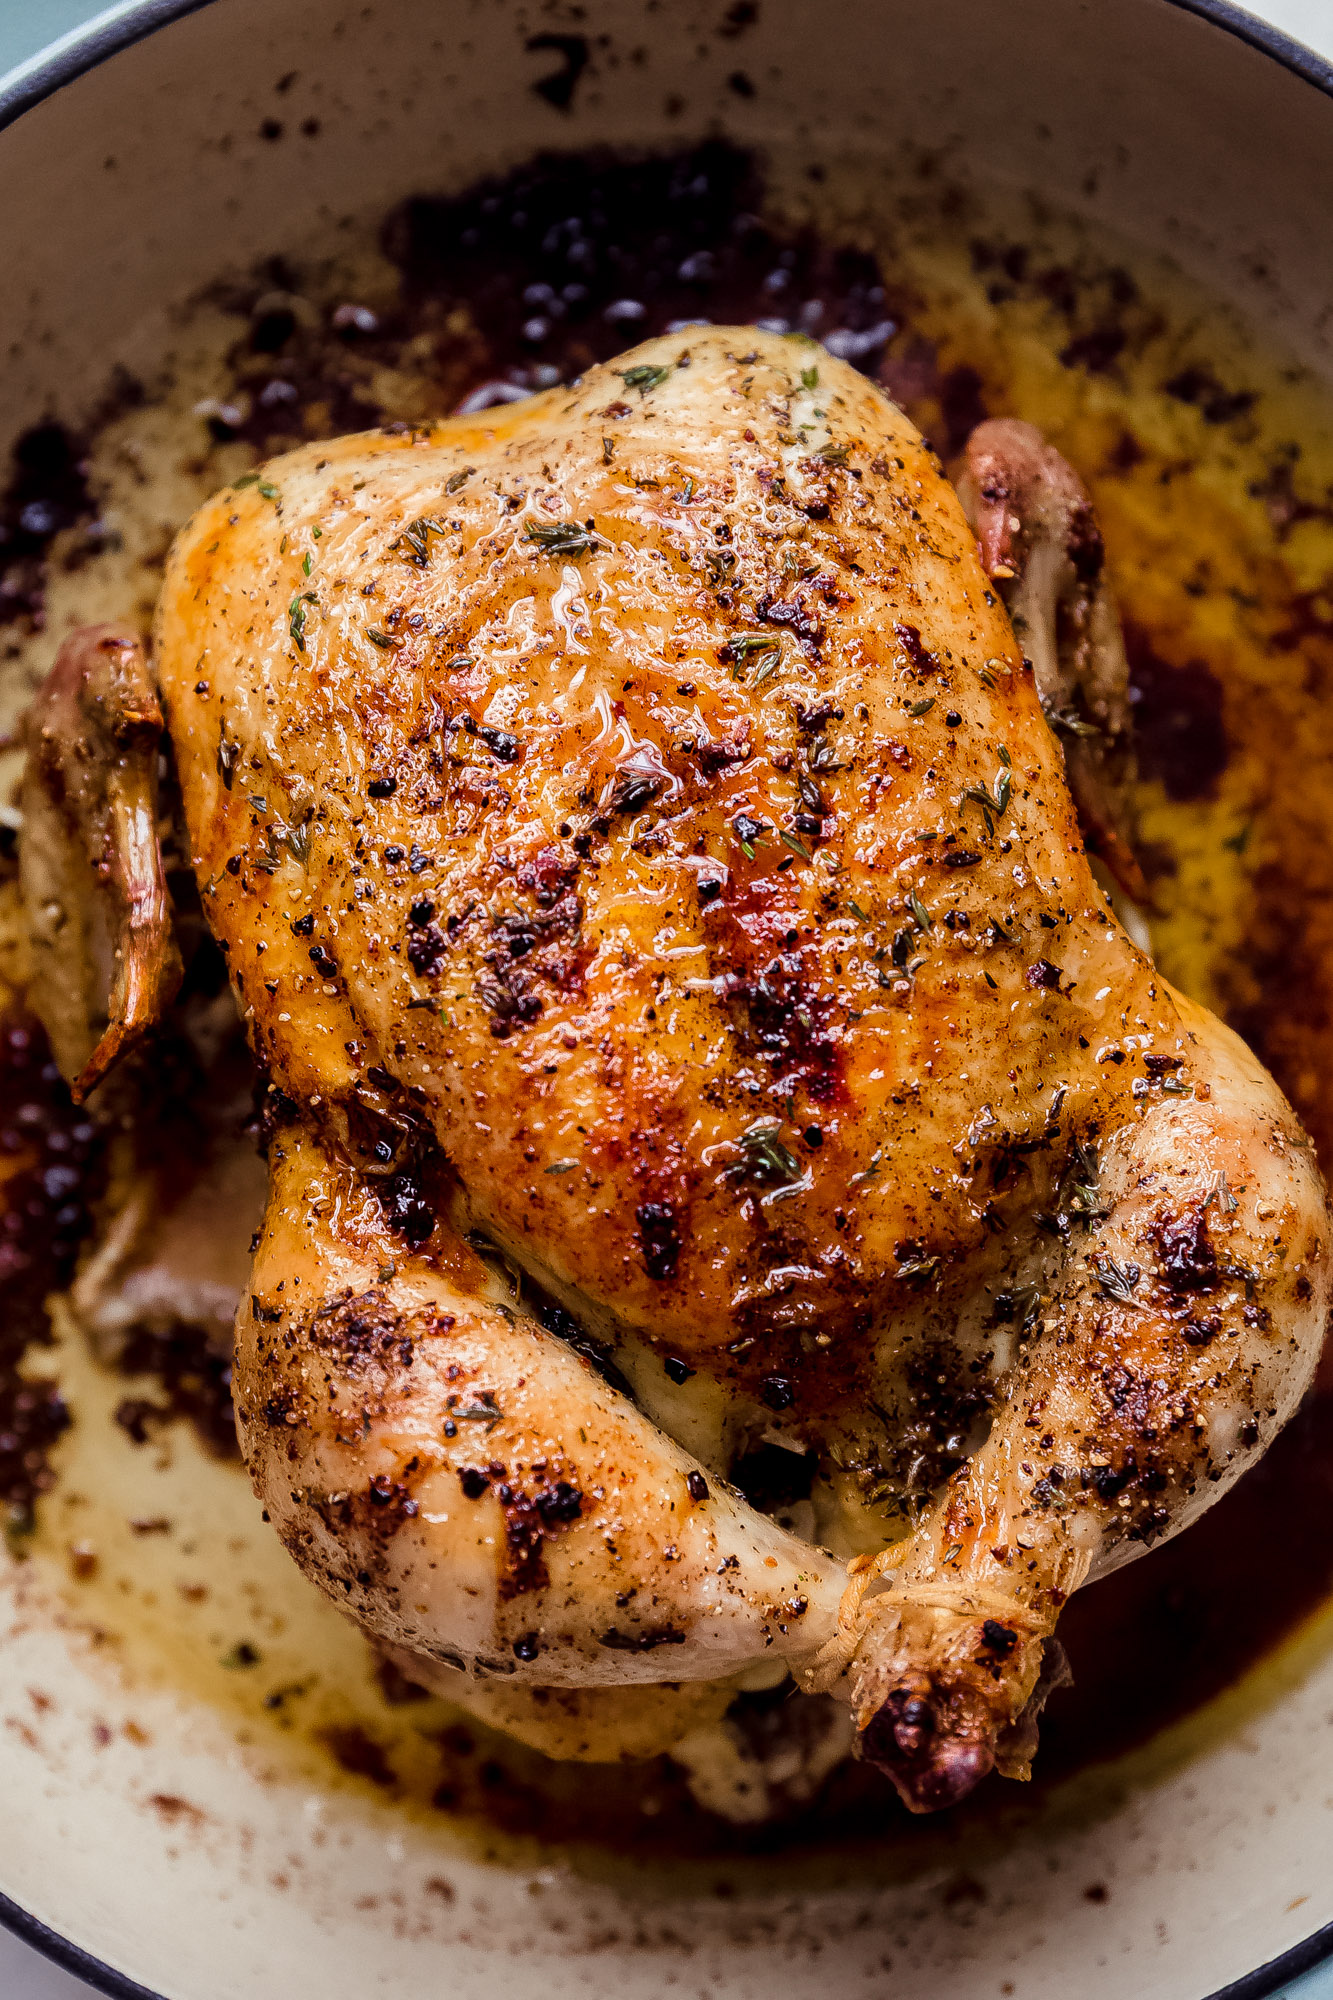 Bake A Whole Chicken At 350 - Bake A Whole Chicken At 350 - Oven Baked ...